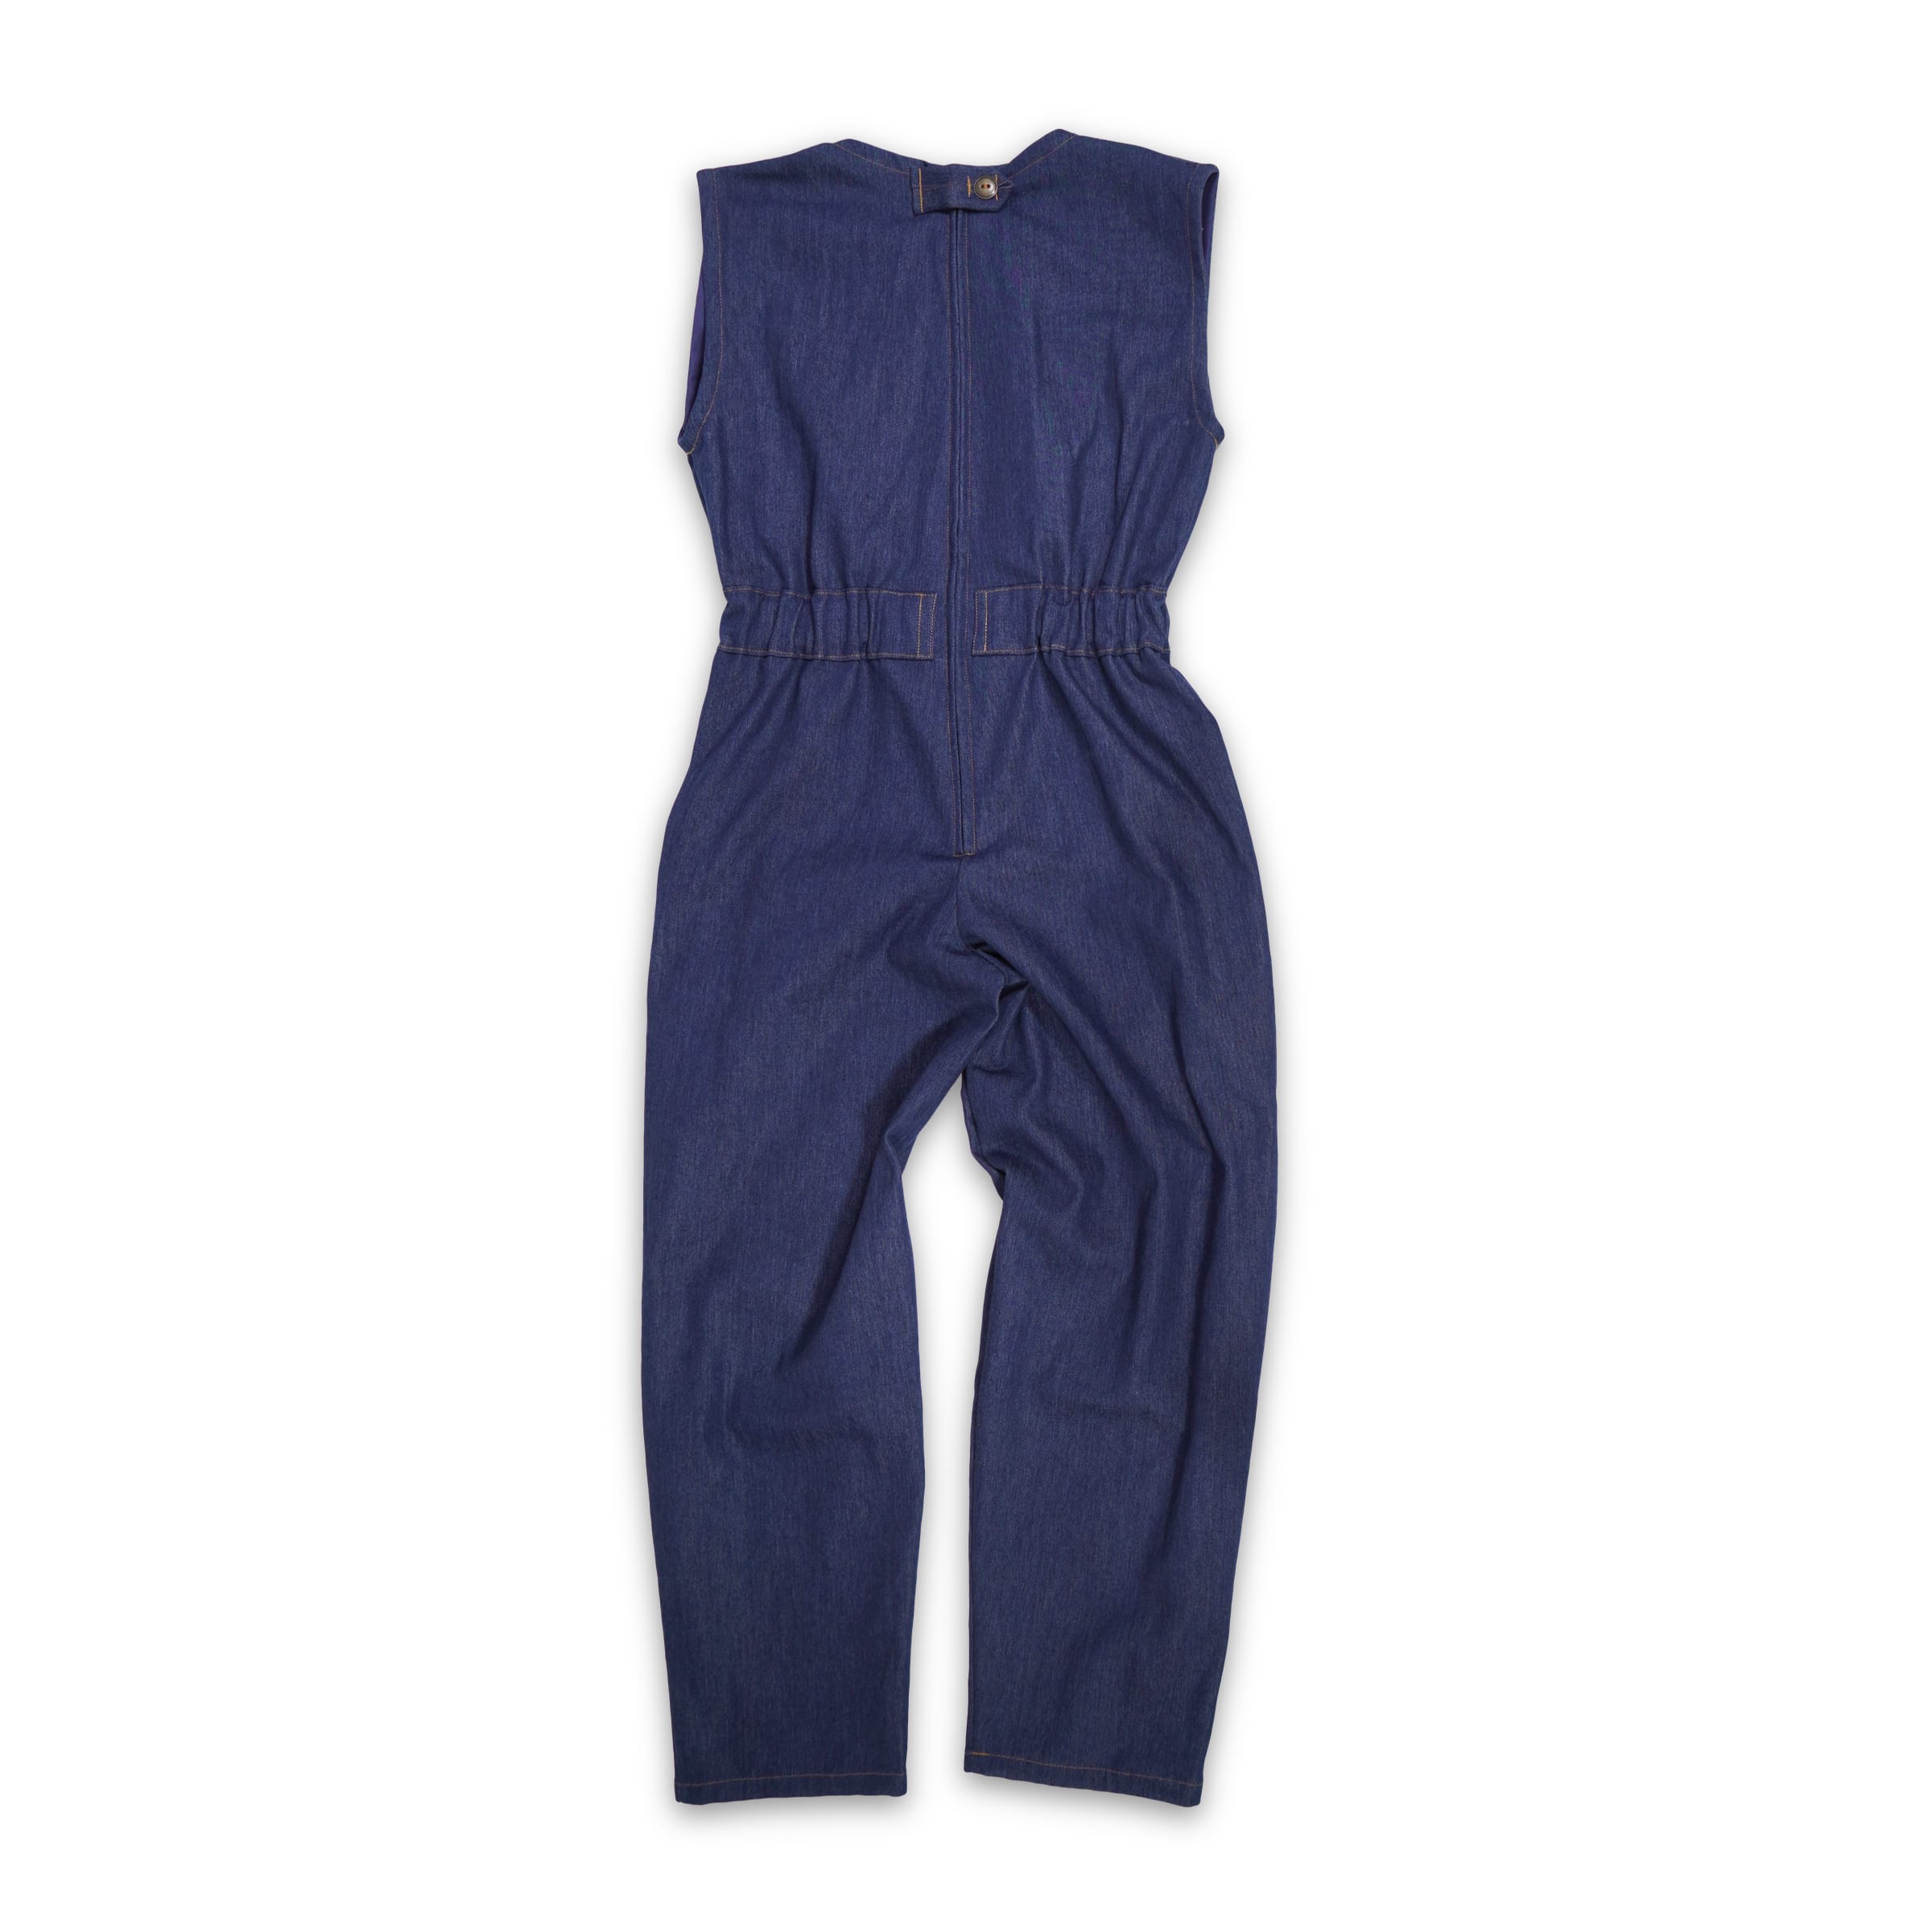 Stretchjeans Overall, blau